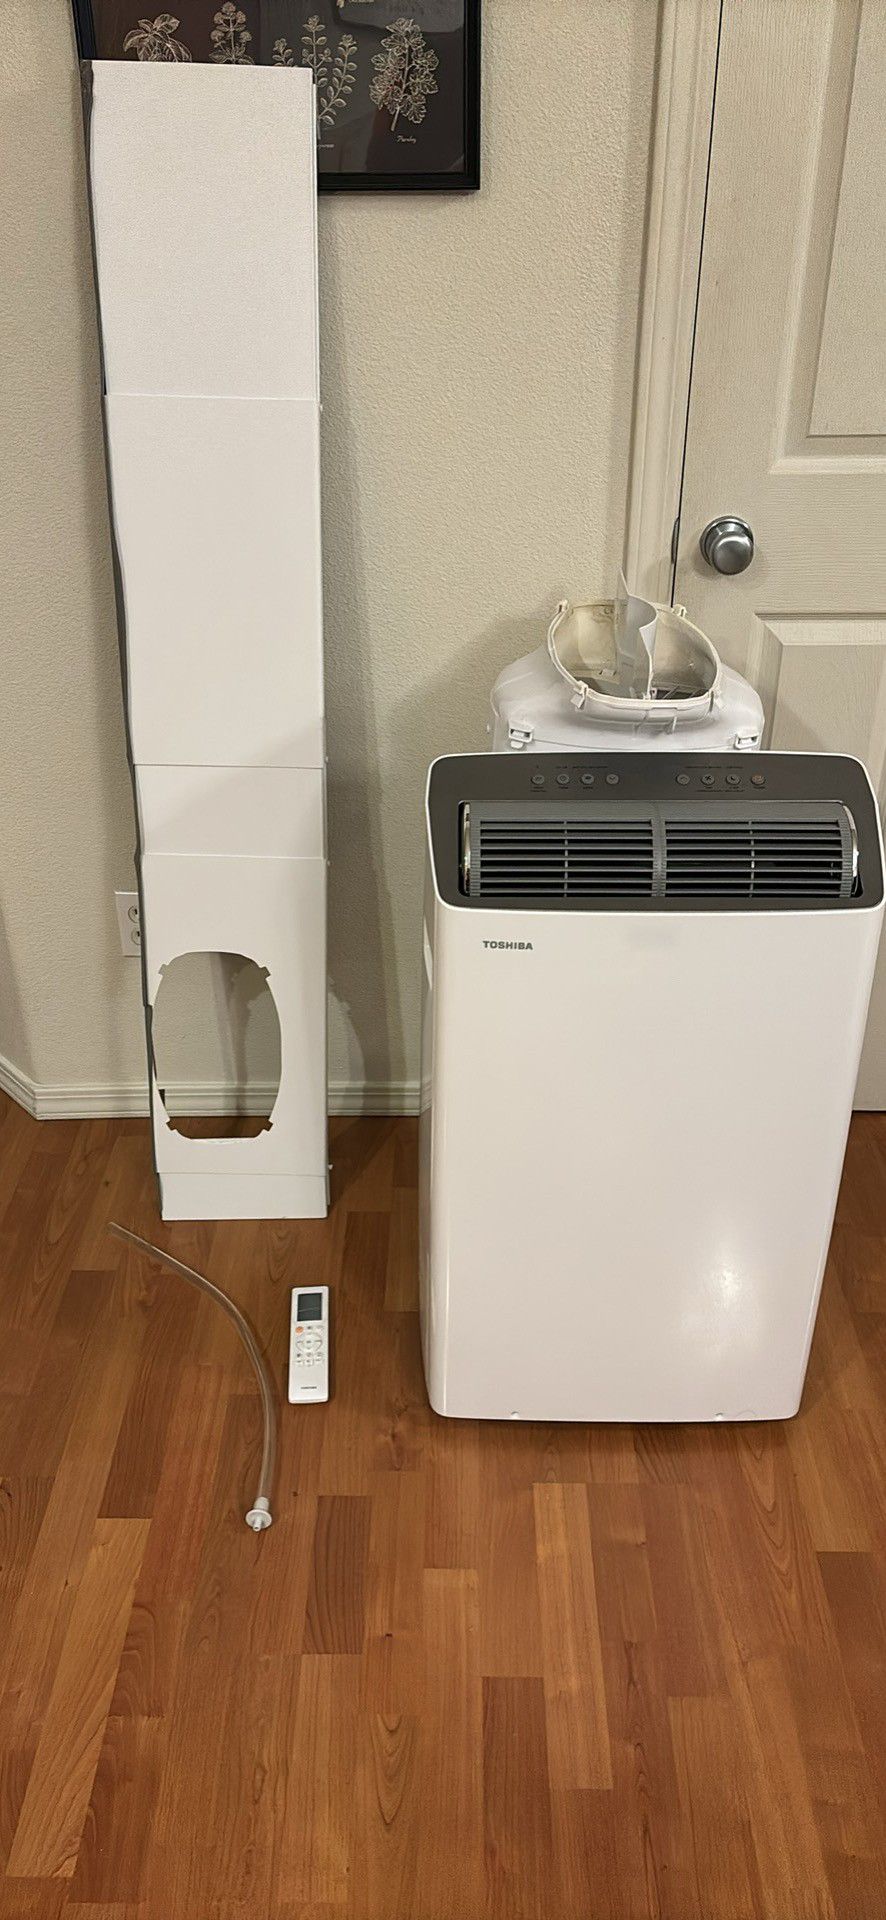 Toshiba Portable Air Conditioner/Heater - WiFi and App Compatible